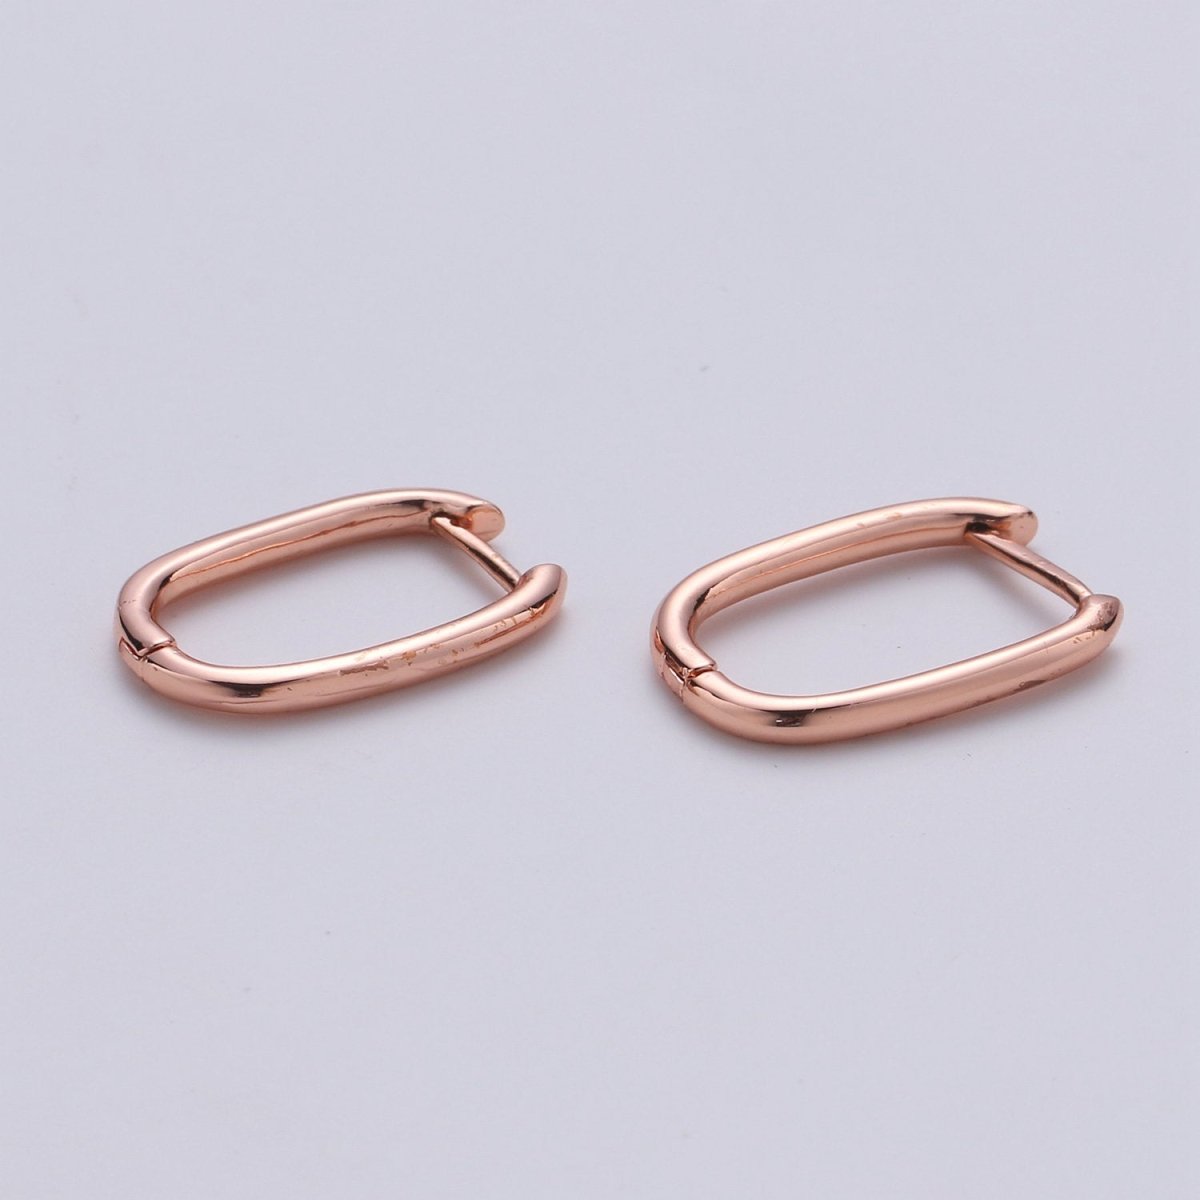 14k Gold Filled Earings / Sterling Silver Thick Earings / Bold rectangle hoop earings / minimalist earings gift for her P-040~P-042 - DLUXCA